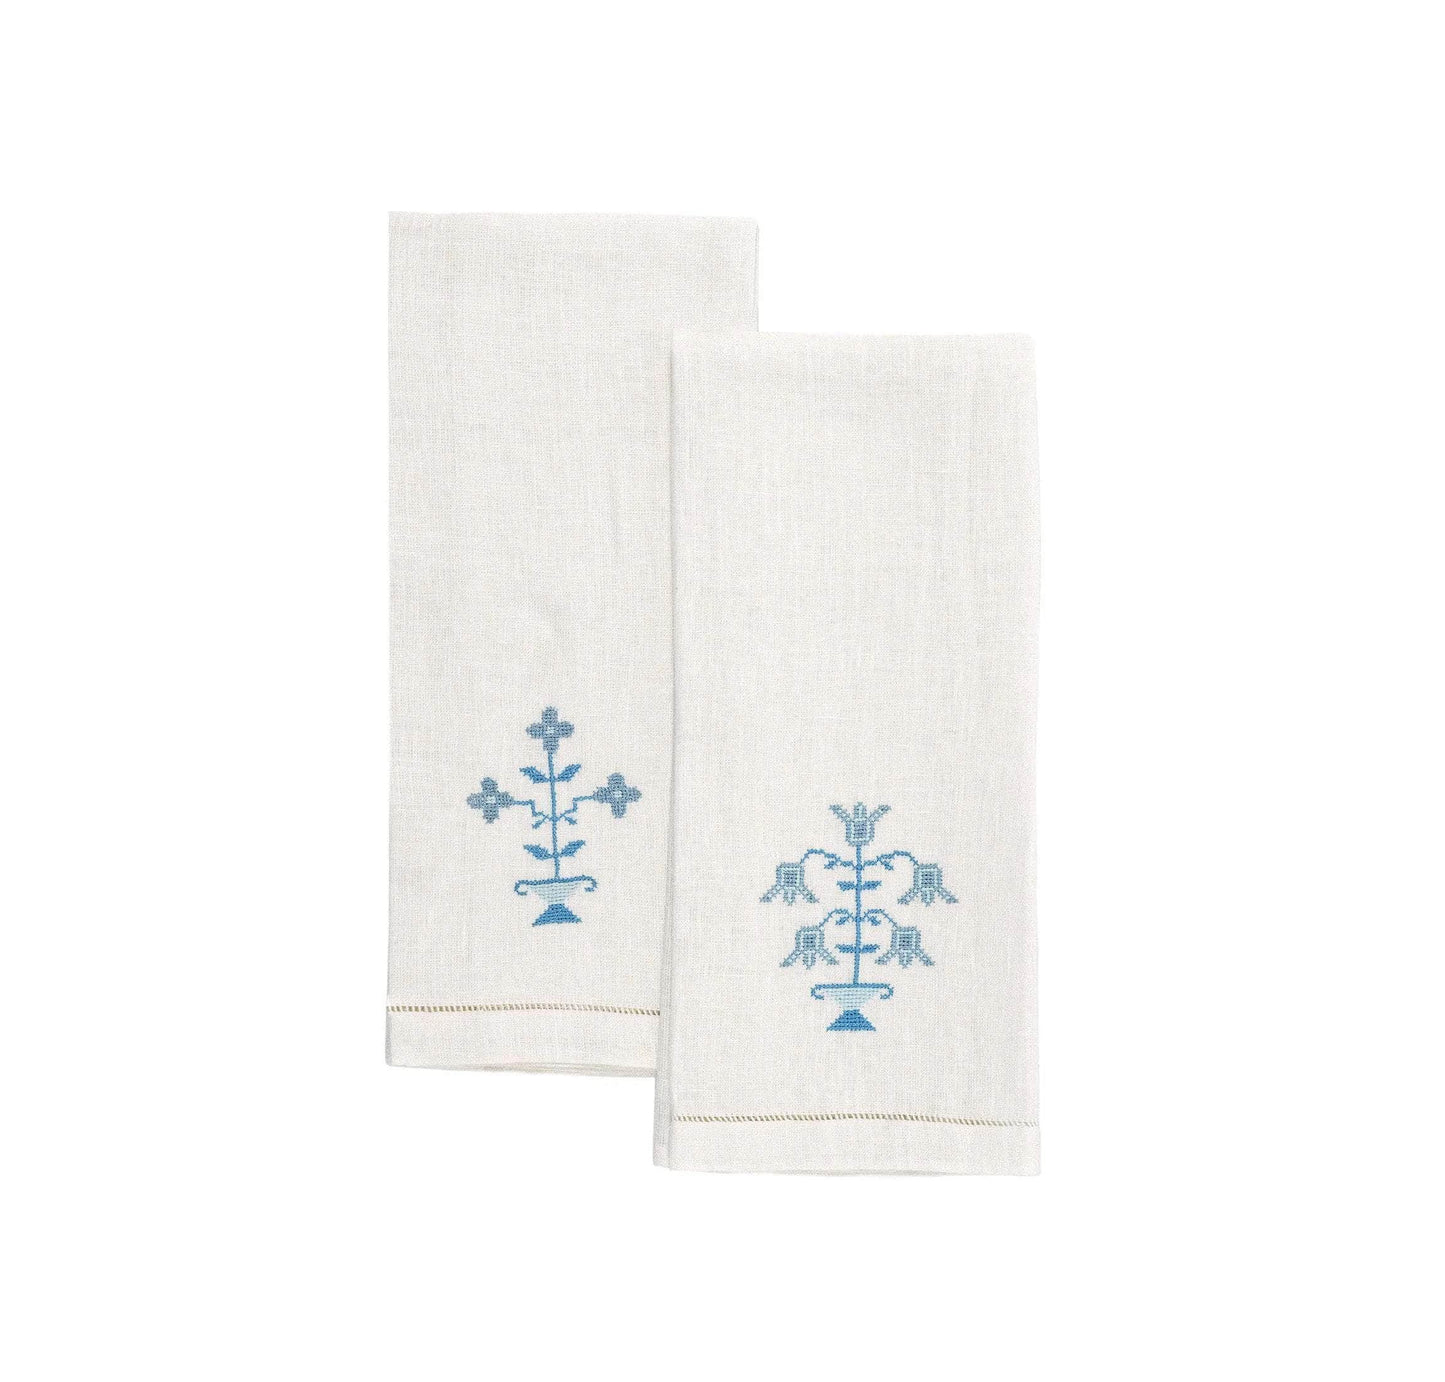 Ottoman Vase Guest Towel (Set of Two)